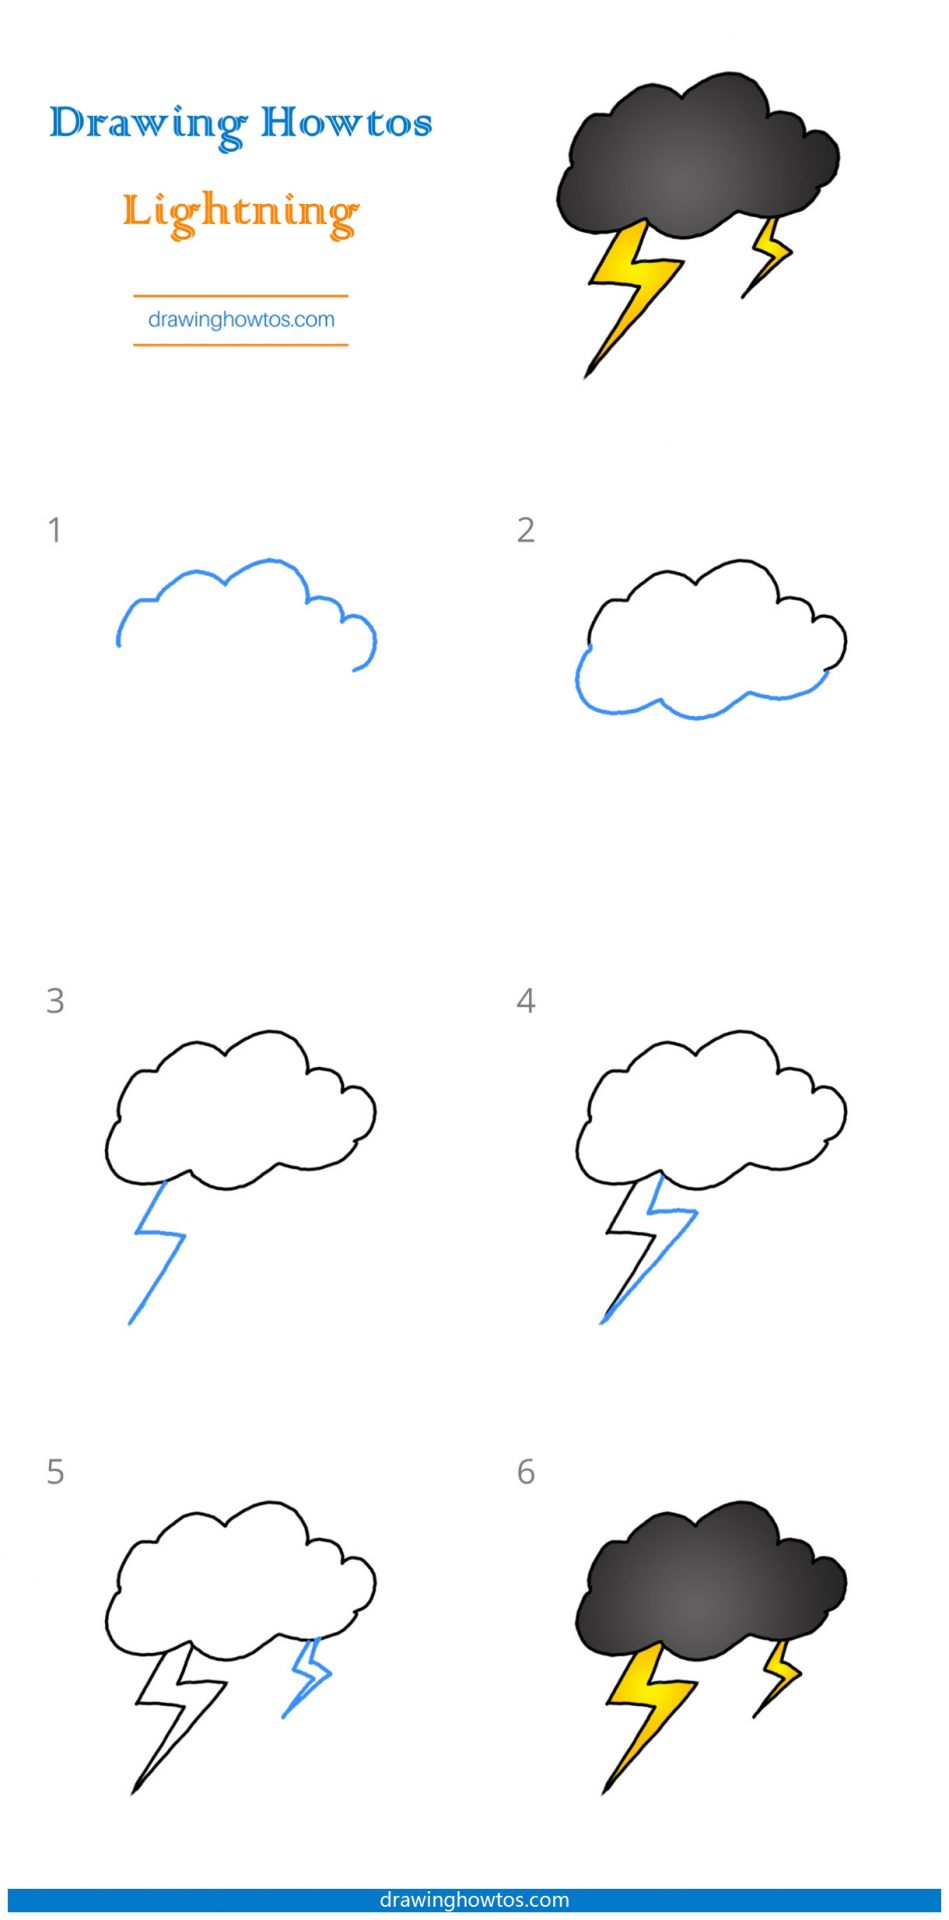 How to Draw Lightning Step by Step